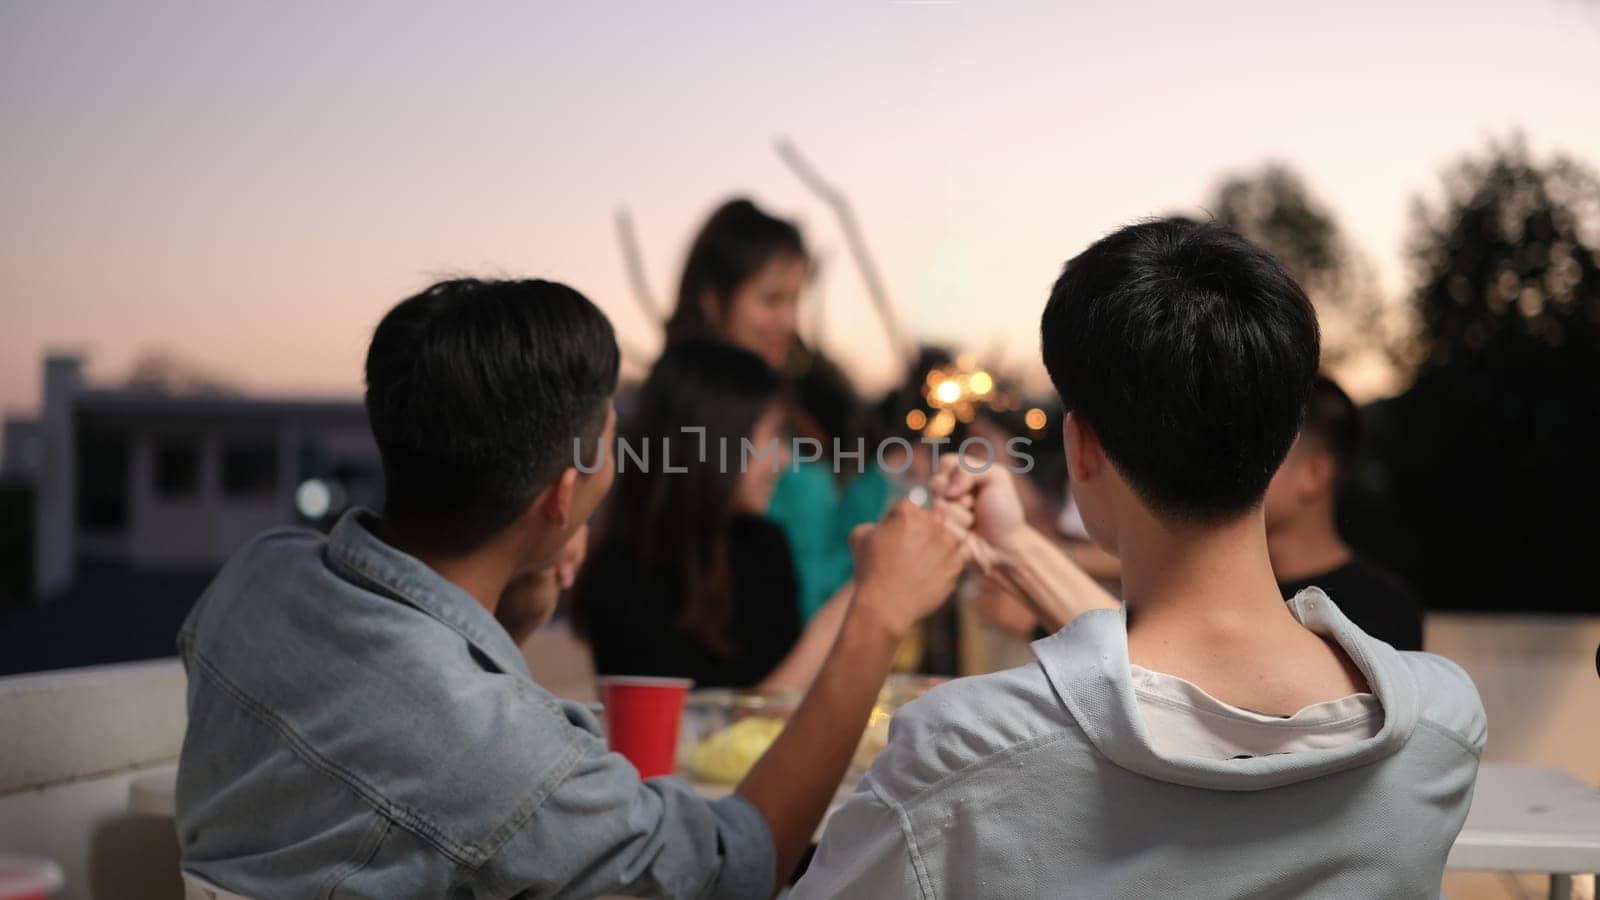 Group of friends taking and enjoying drinks during rooftop party at sunset. by prathanchorruangsak